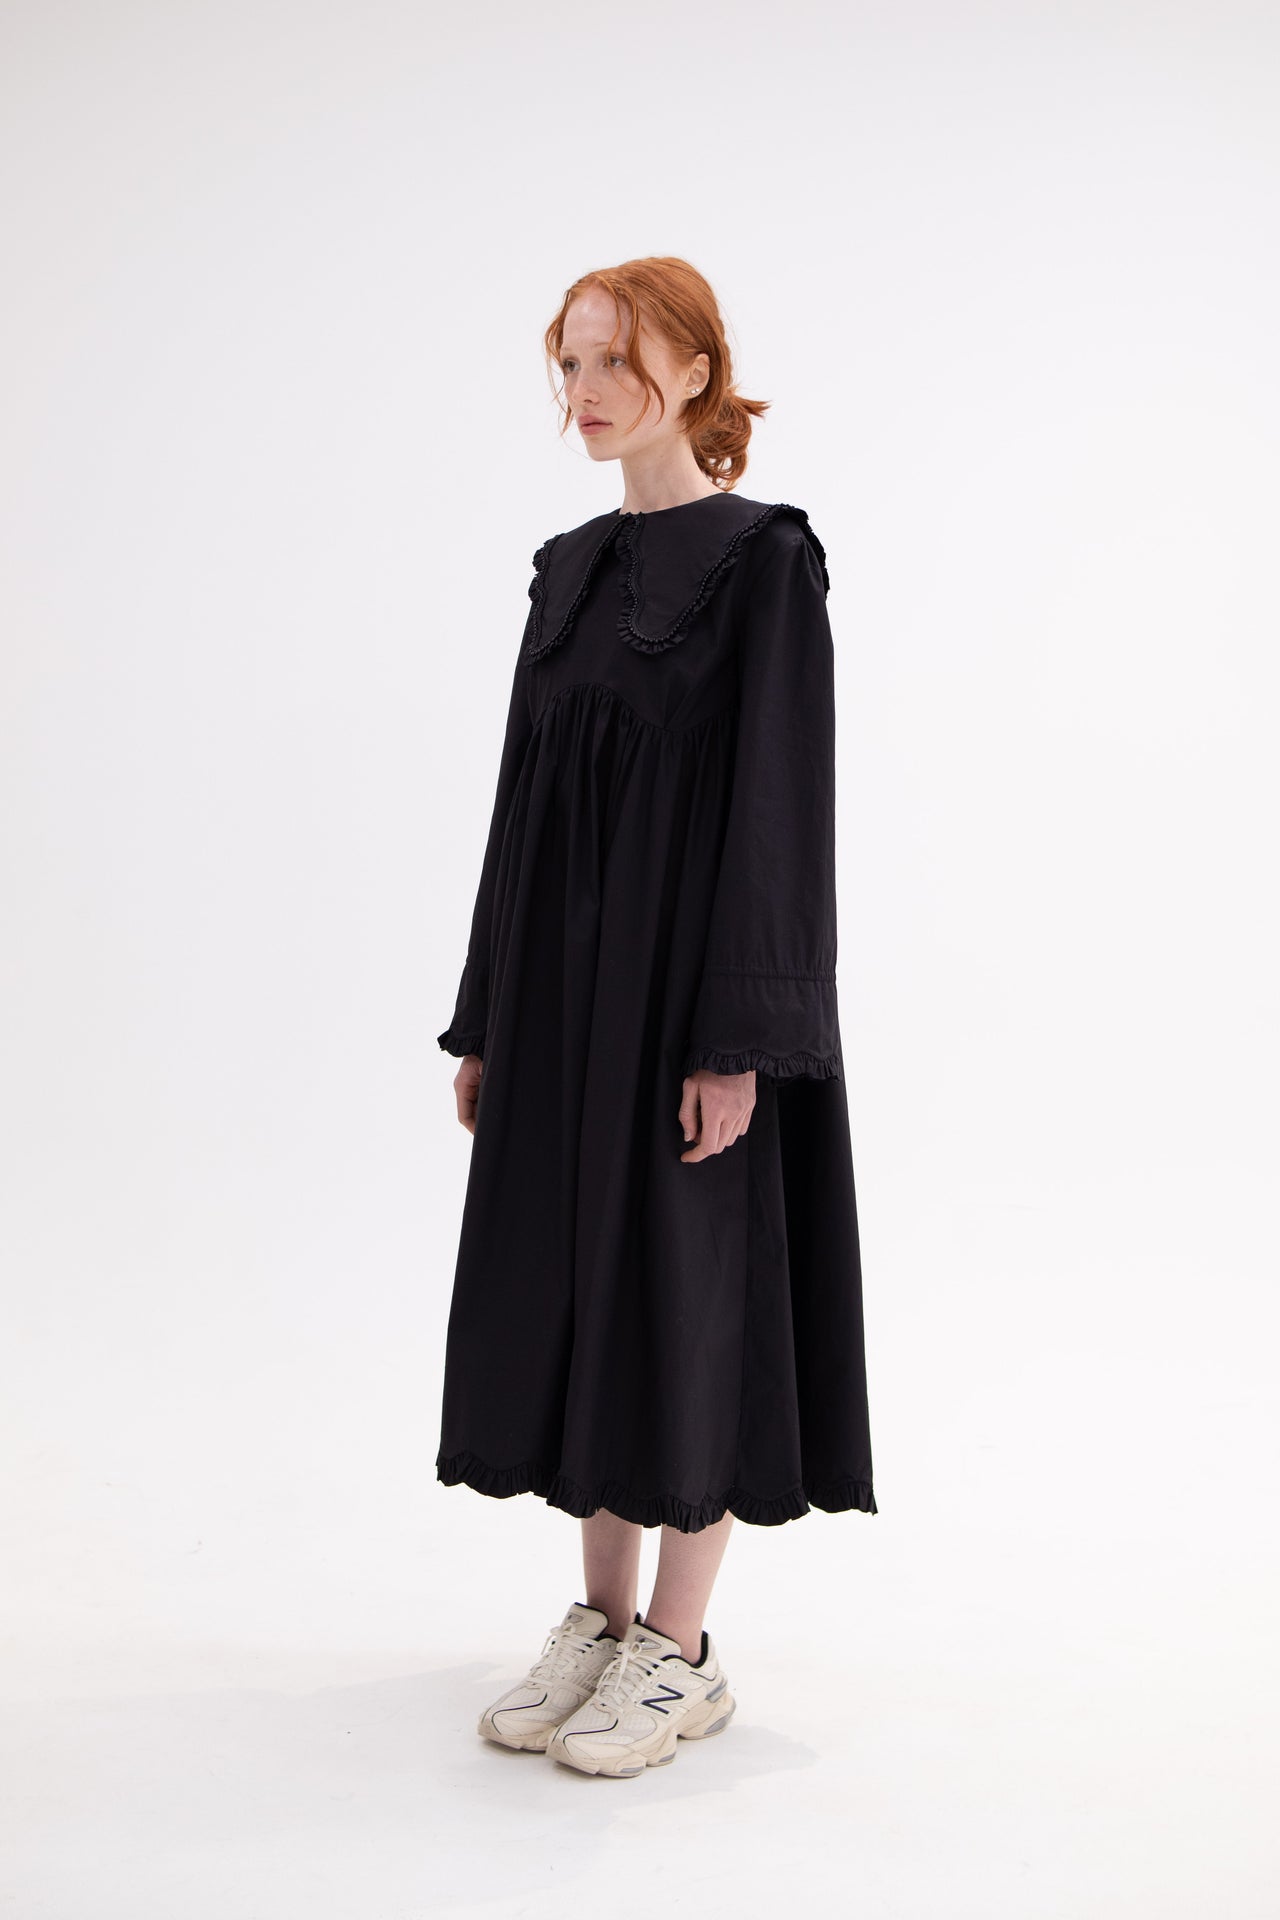 Roco black - sleepwear and everyday dress with a large collar with scalloped edges and gathered frills